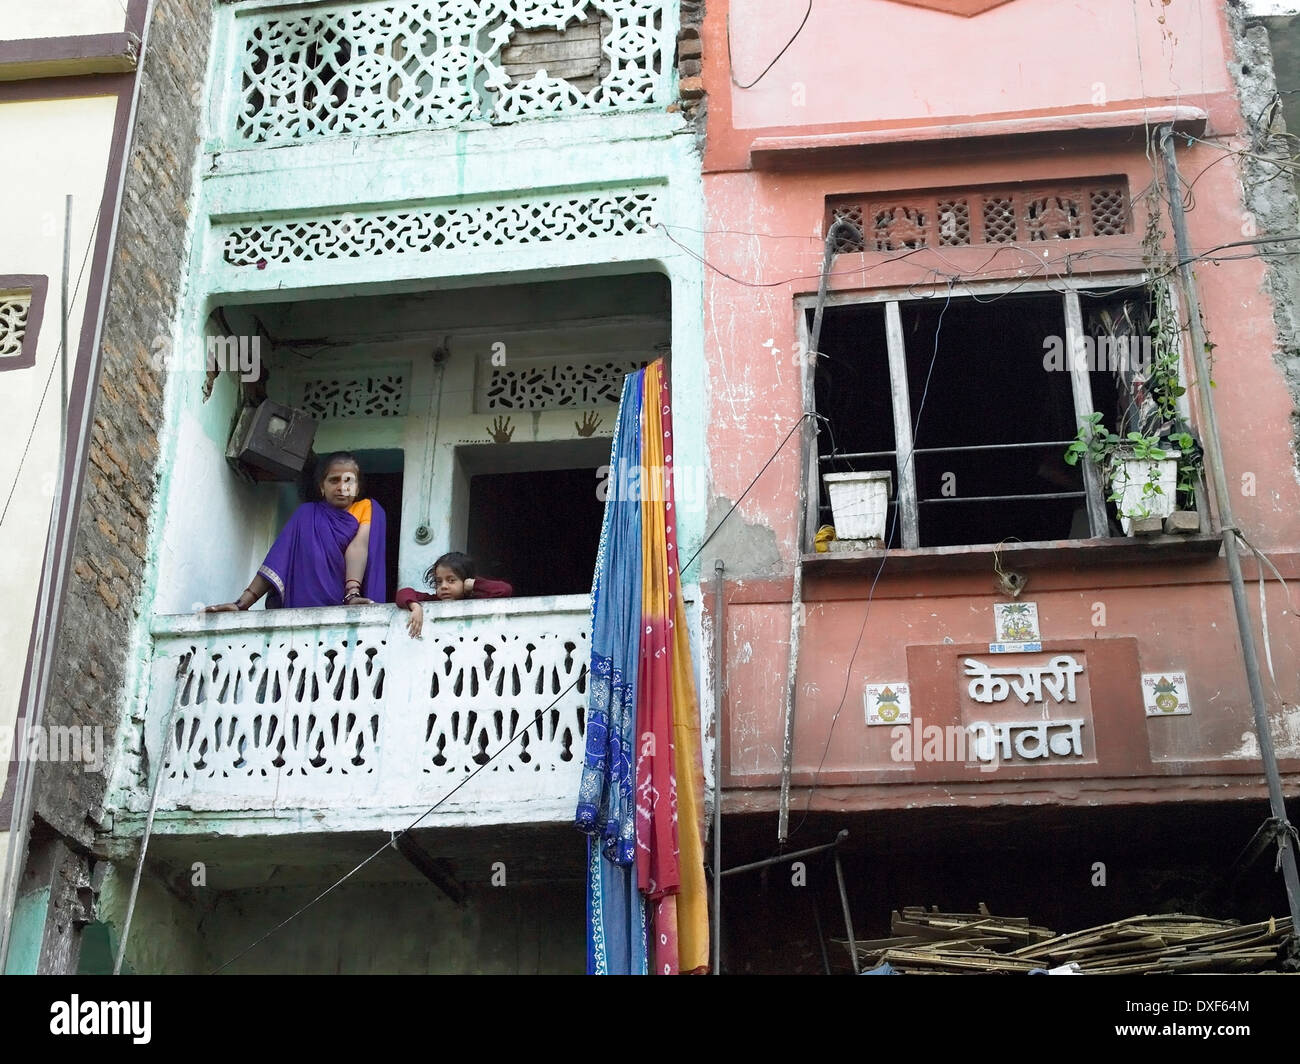 People living in slum housing in the city of Udaipur in the Rajasthan region of western India. Stock Photo